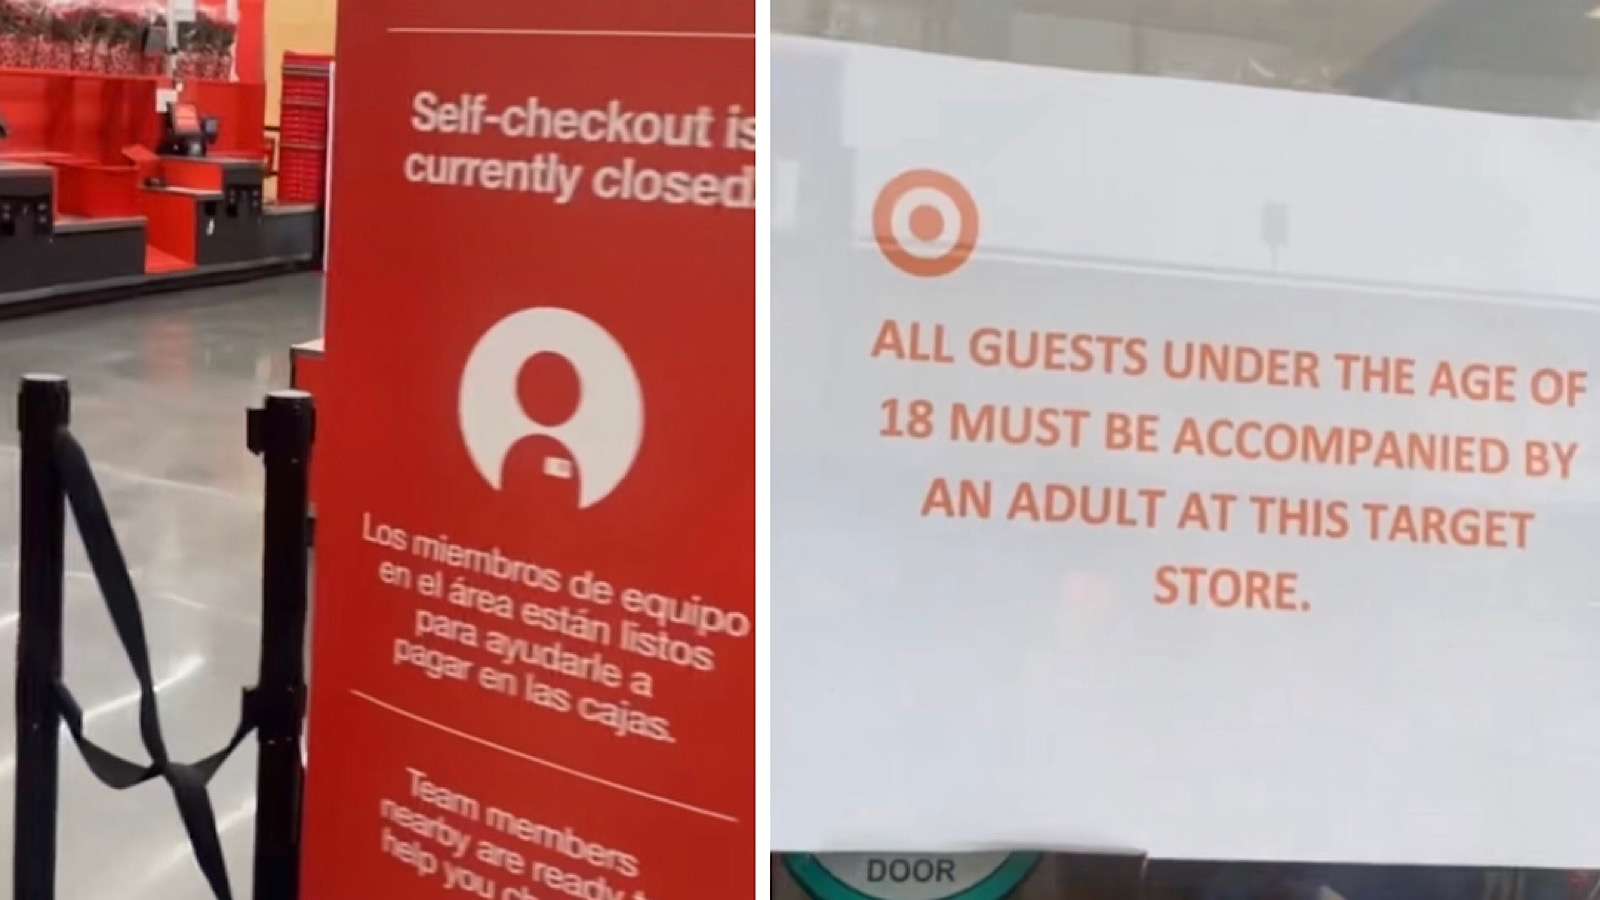 target doesn't allow minors inside without adult